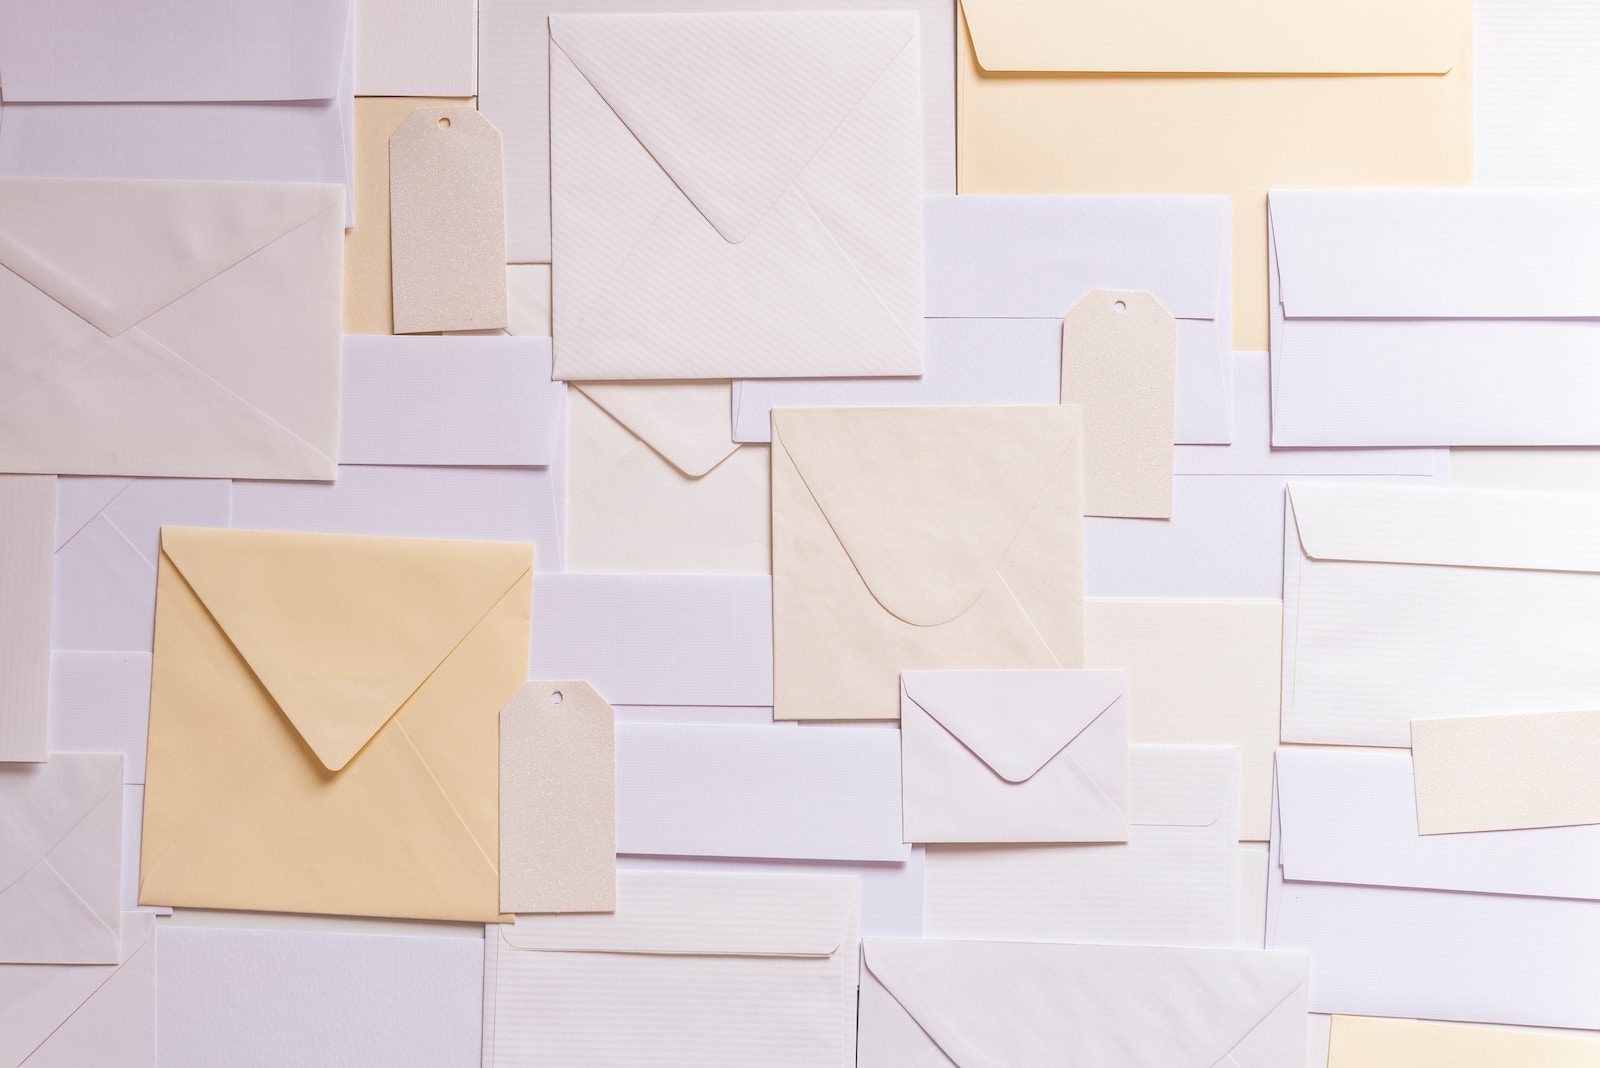 How to Send Bulk Email Without Spamming